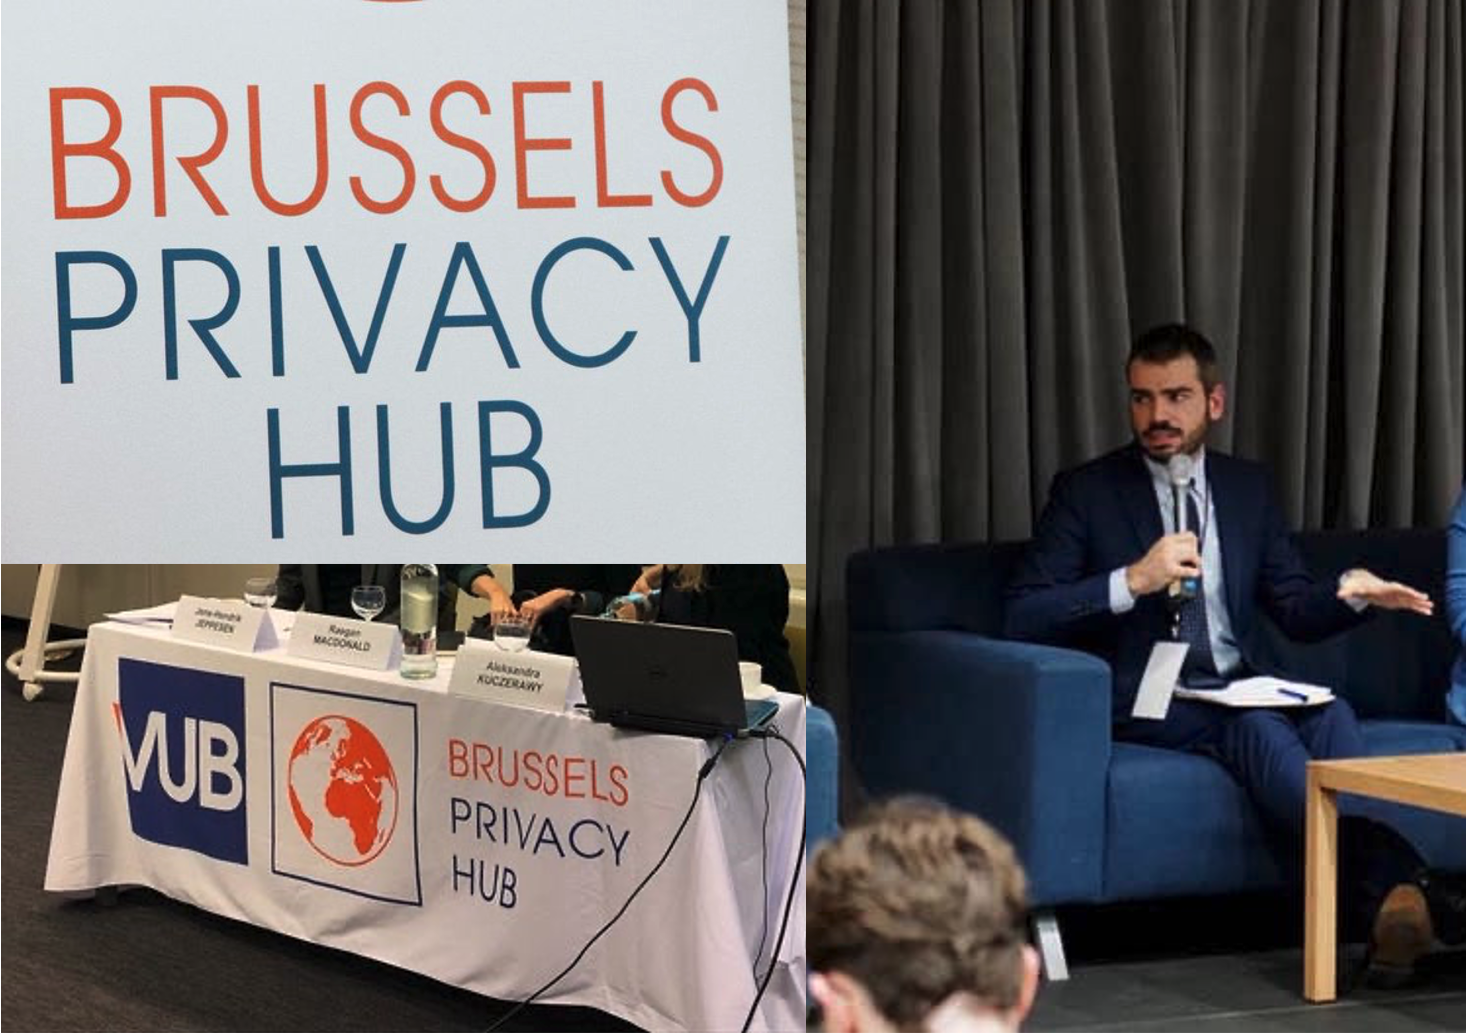 Gianclaudio Malgieri is the new Co-Director of the Brussels Privacy Hub